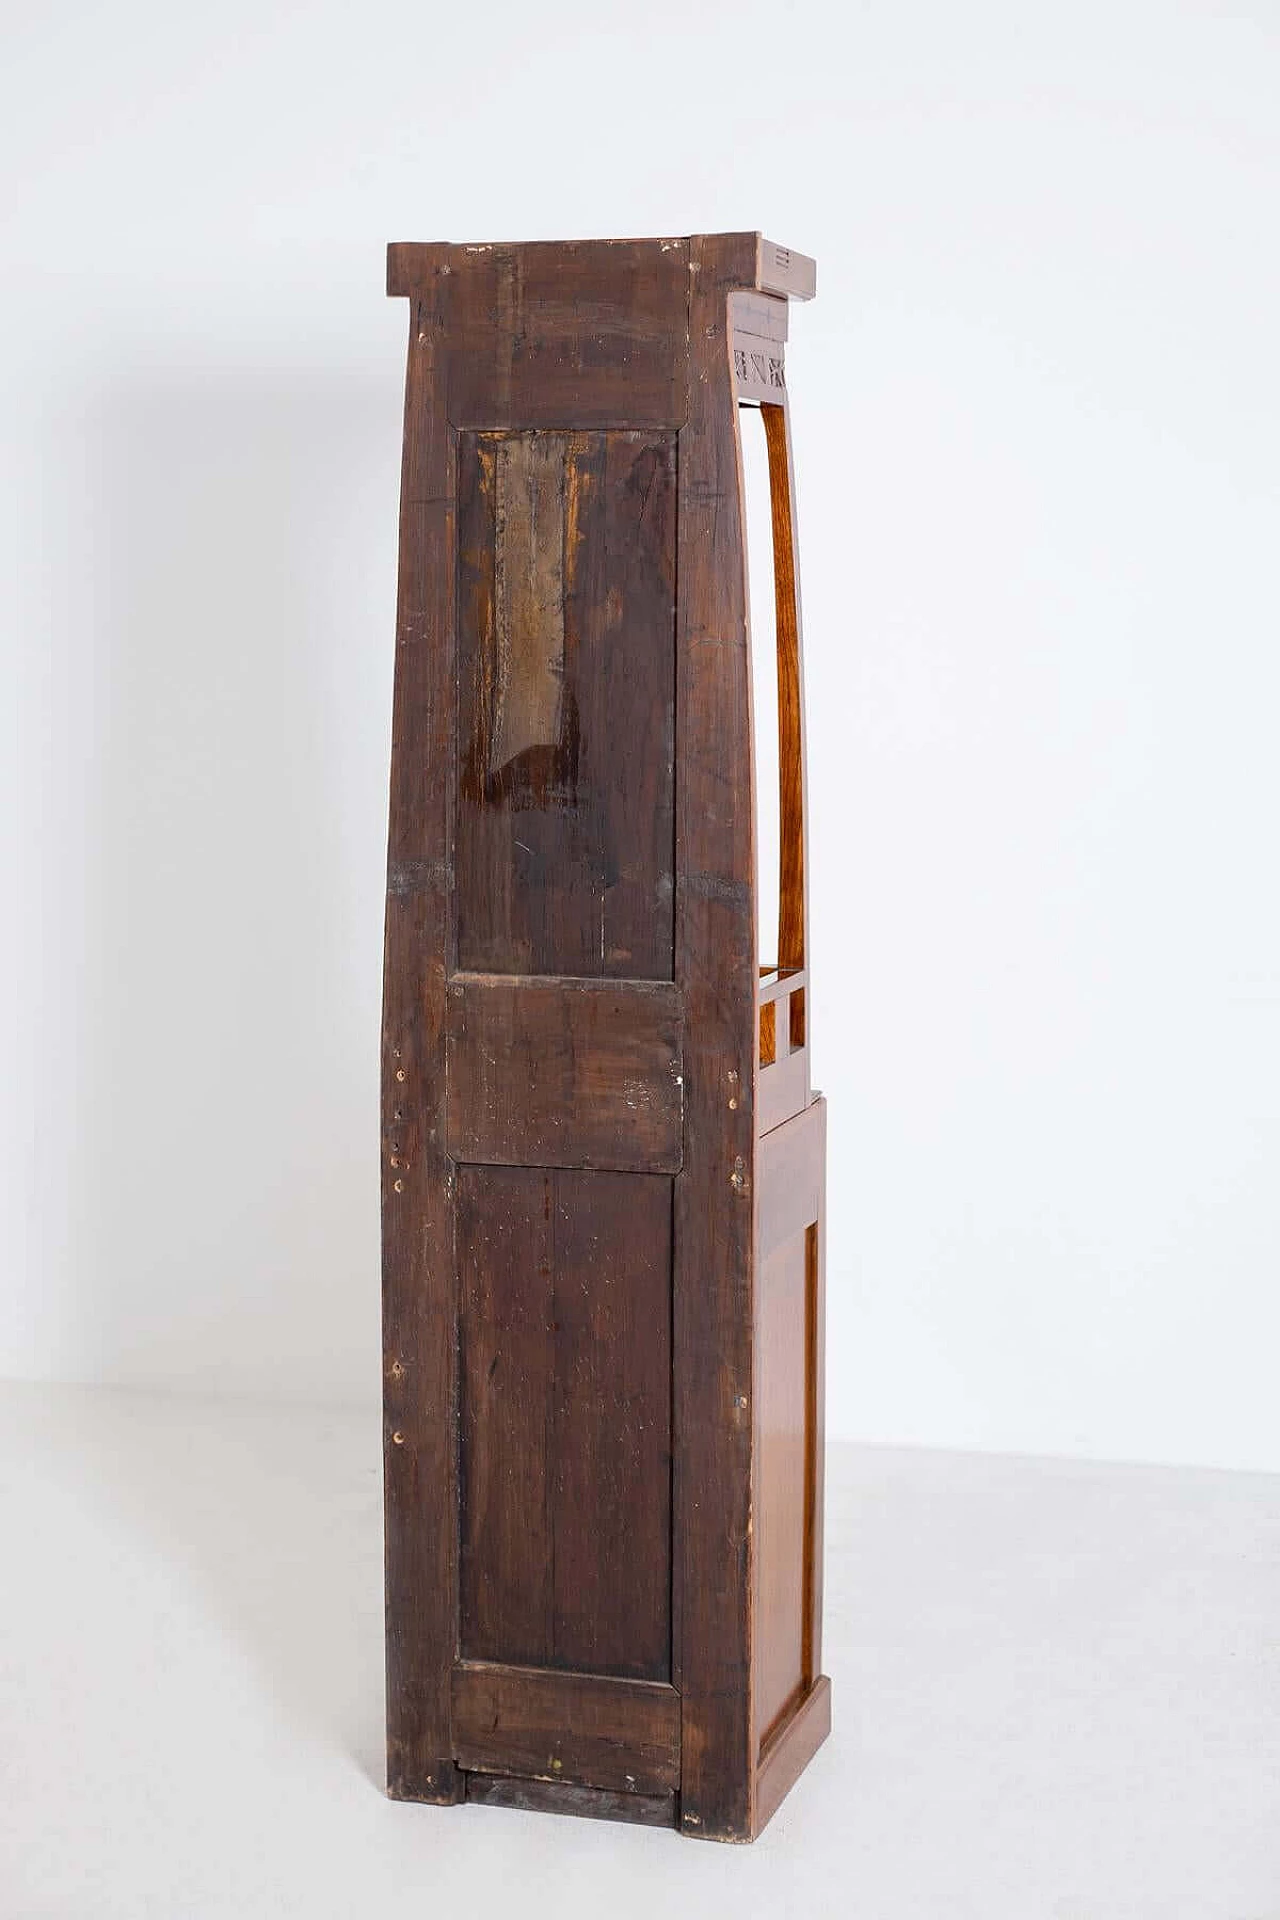 Carved wooden cabinet in Art Nouveau style, 20th century 1403436